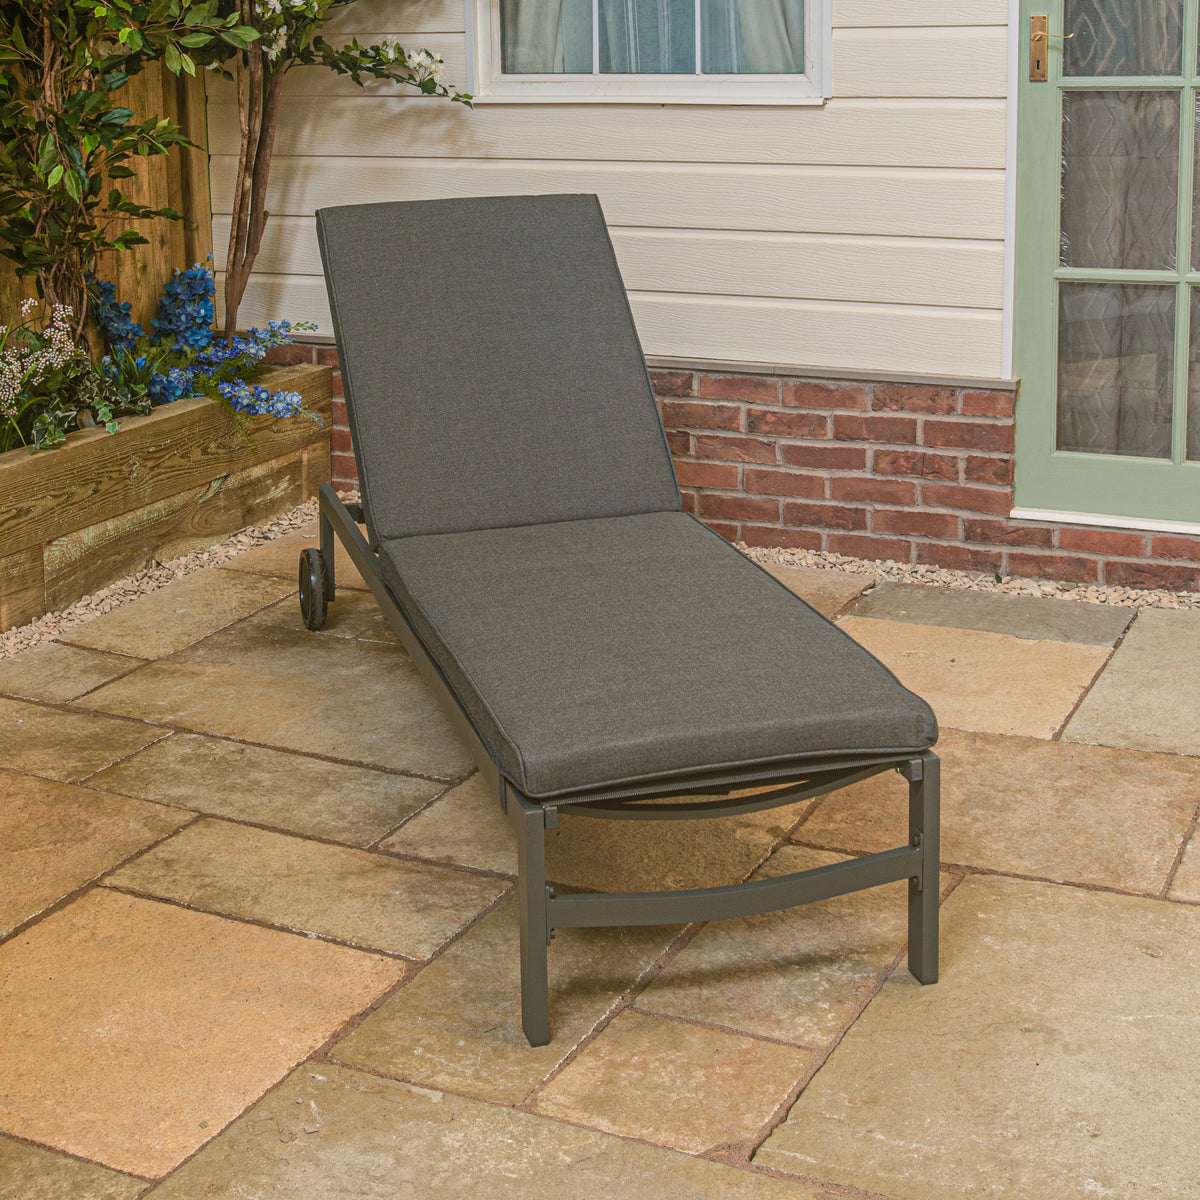 LG Outdoor Monza Aluminium Sunlounger Bed with Cushion